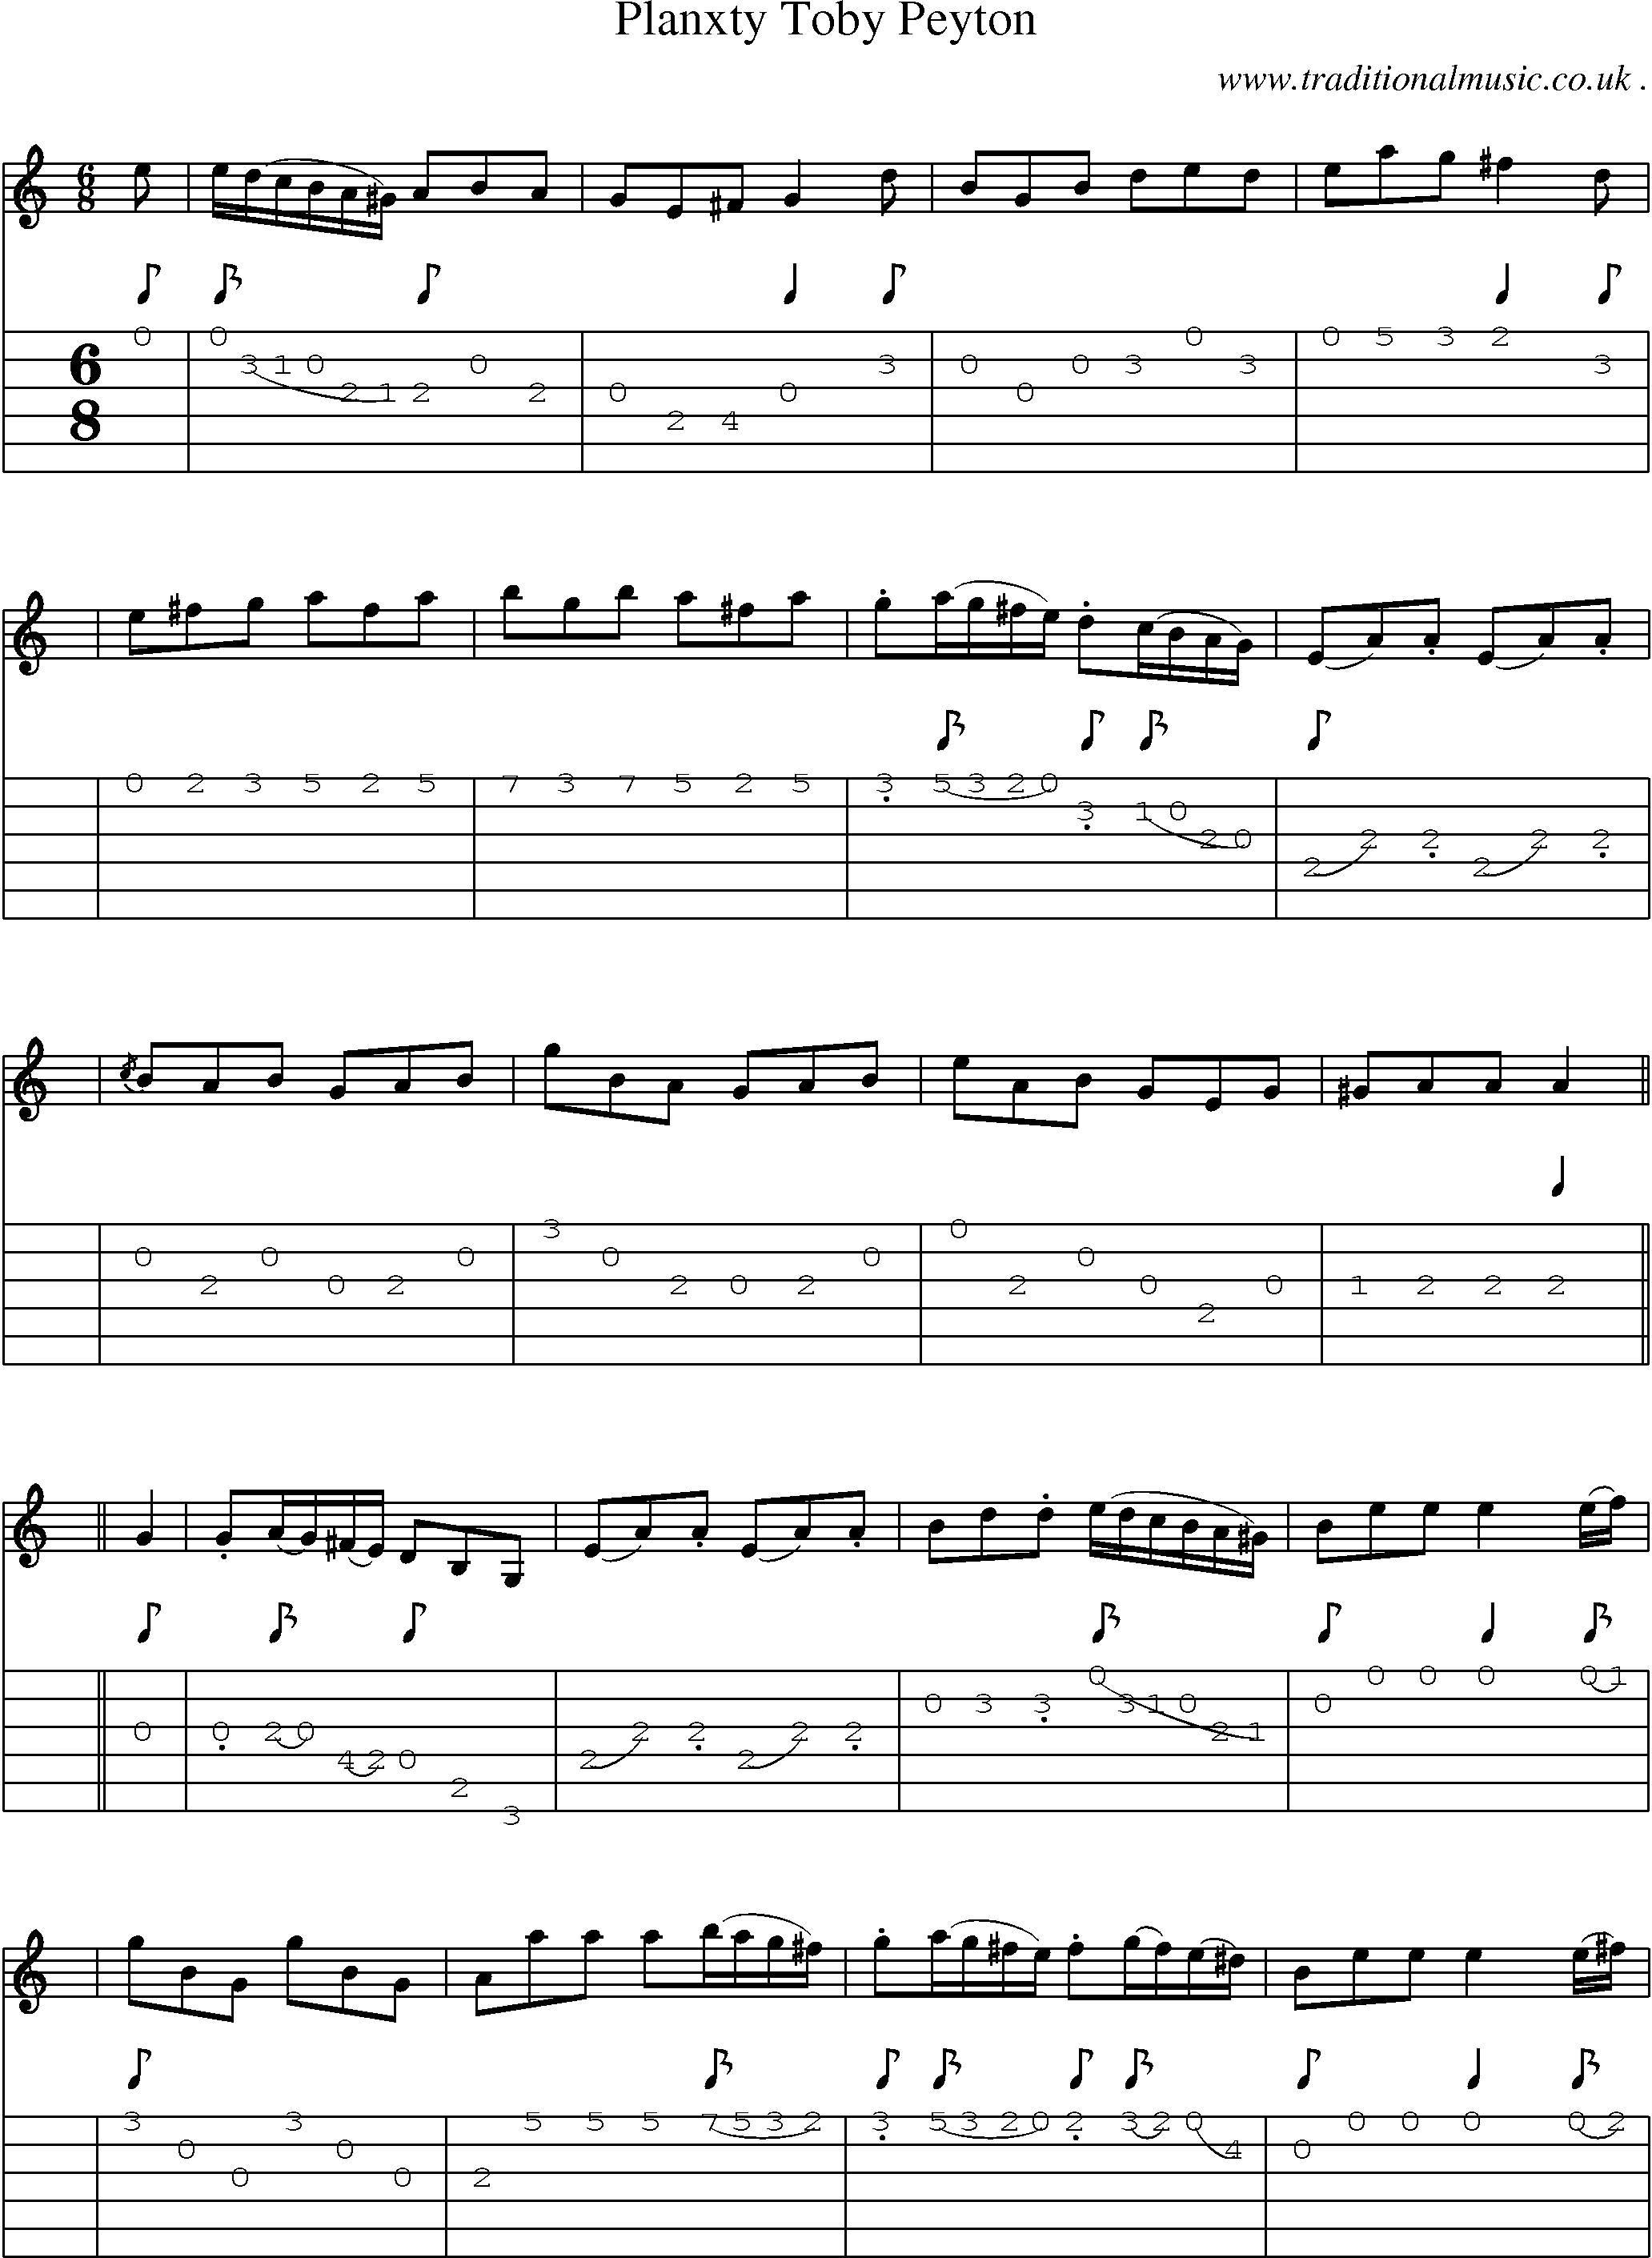 Sheet-music  score, Chords and Guitar Tabs for Planxty Toby Peyton